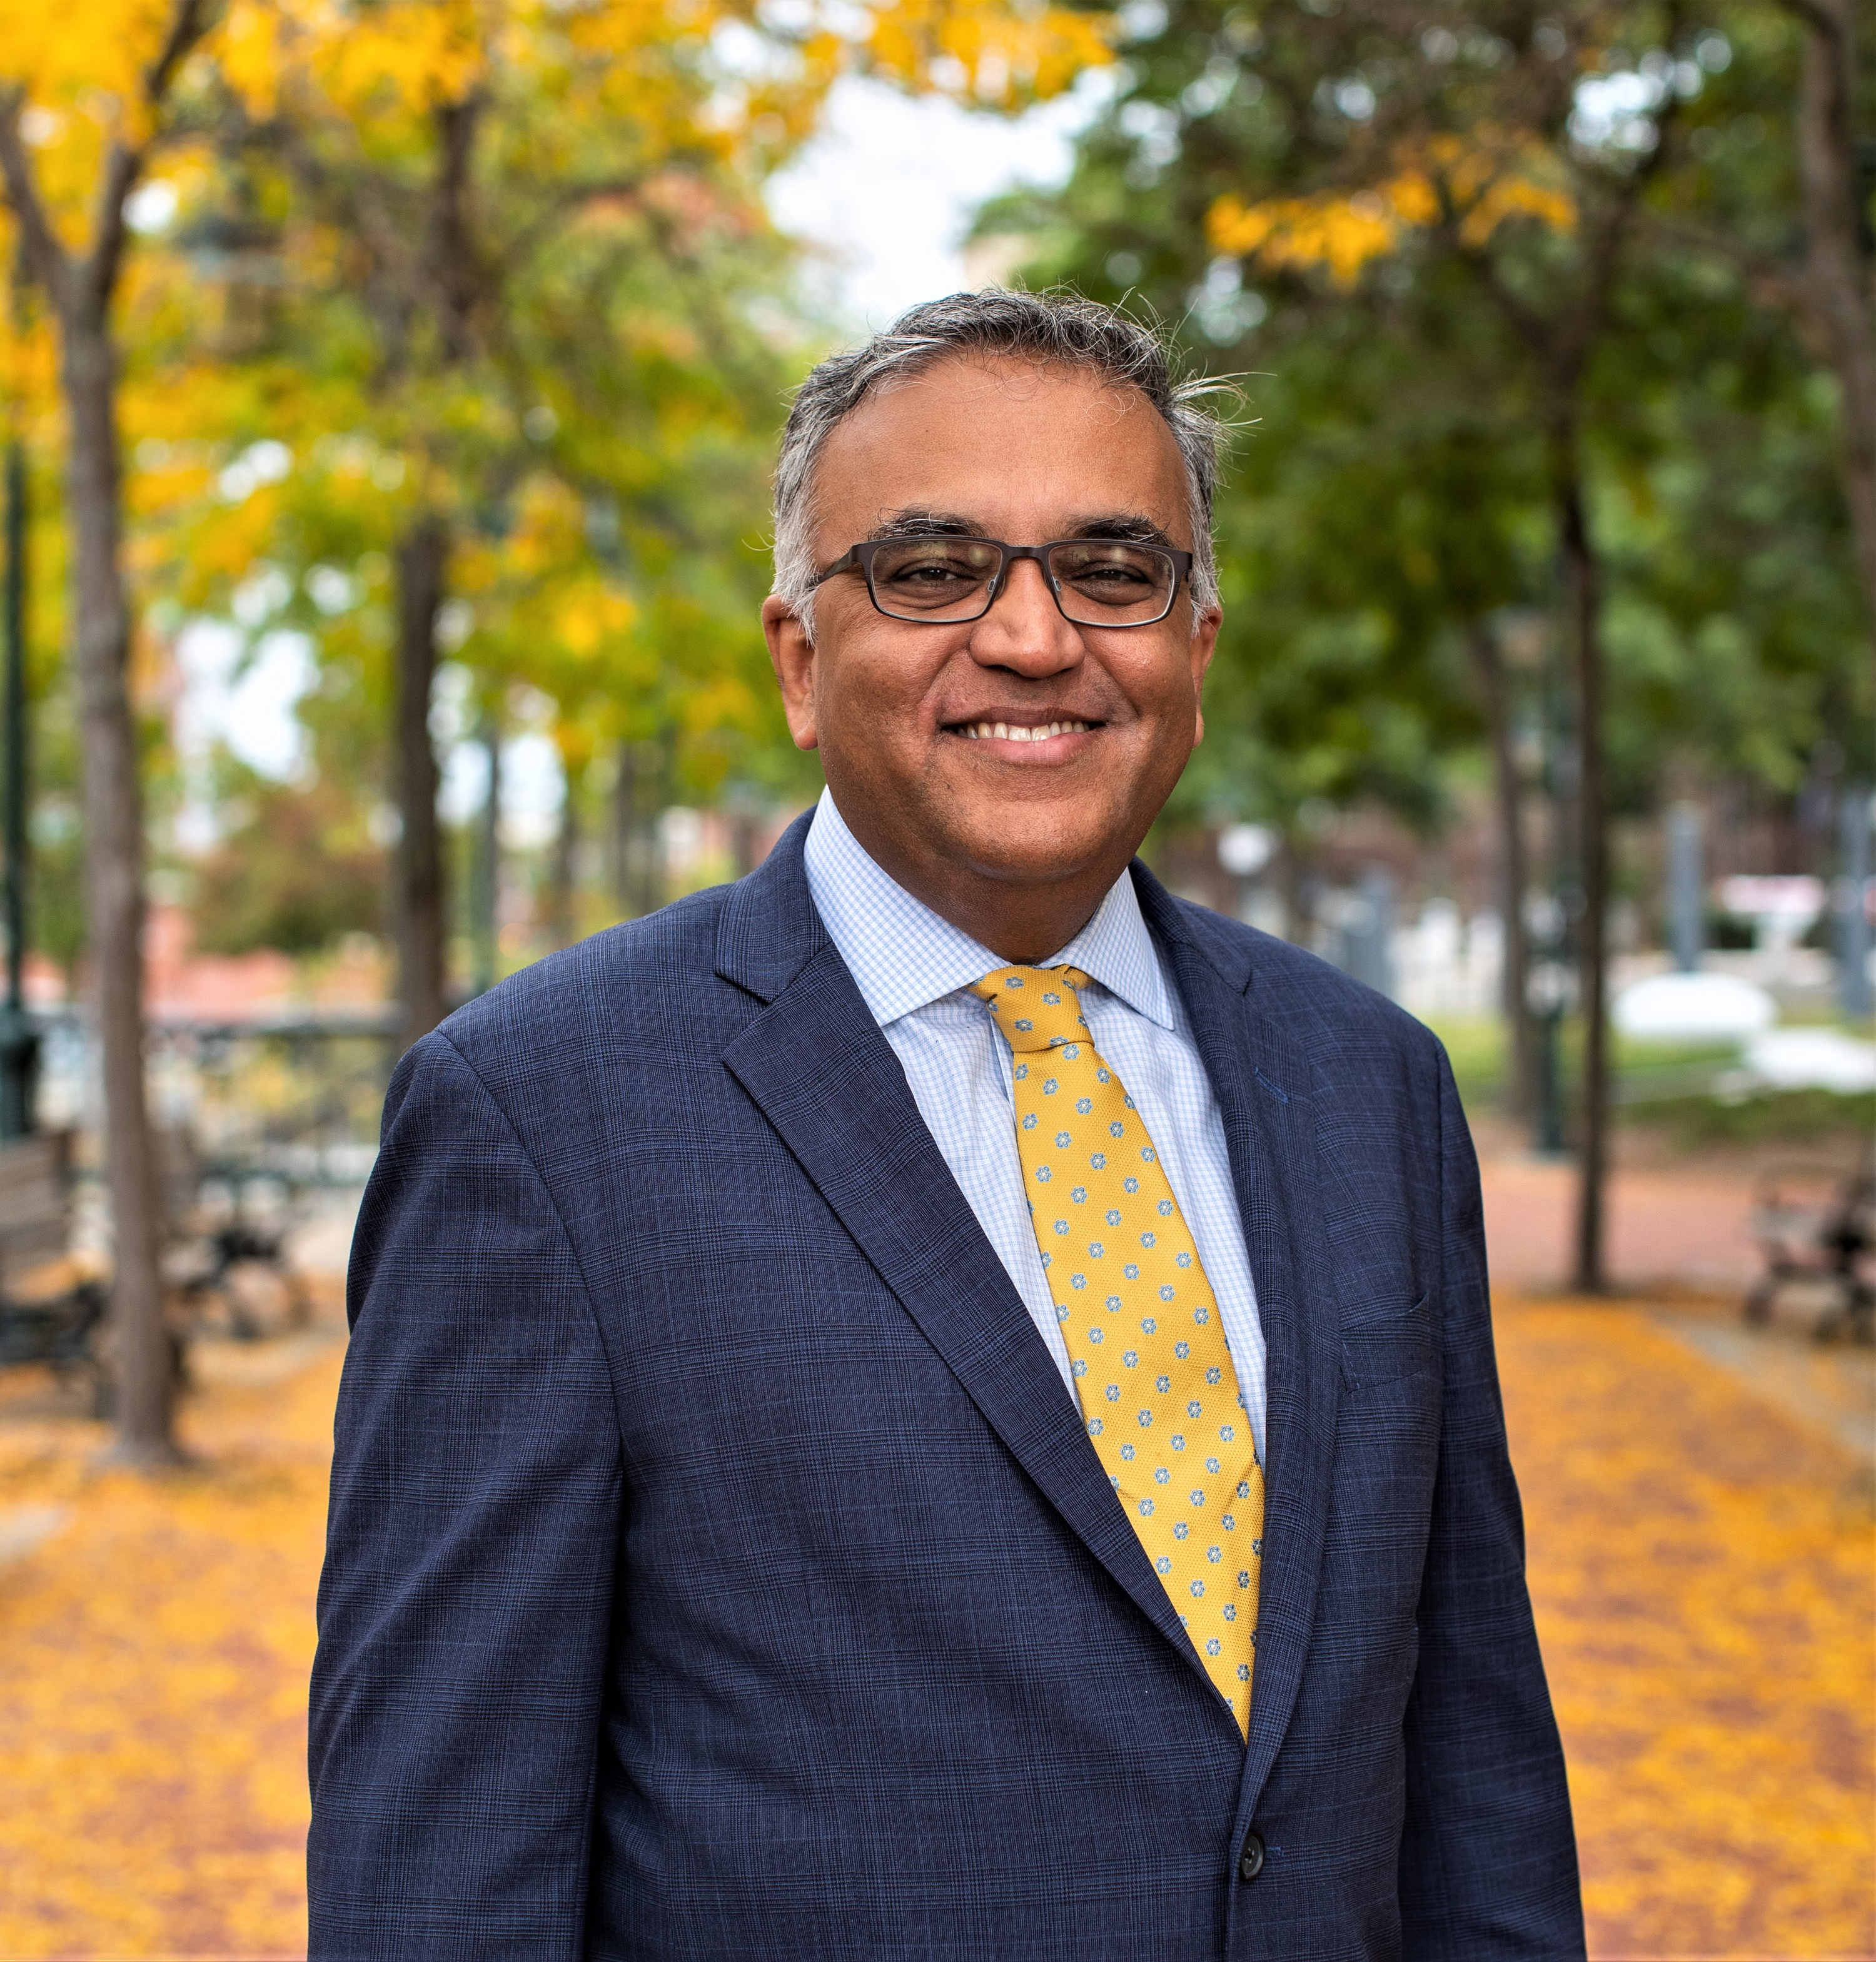 Welcome to Episode 8 of “COVID: What comes next,” an exclusive weekly Providence Journal/USA TODAY NETWORK podcast featuring Dr. Ashish Jha, dean of the Brown University School of Public Health and an internationally respected expert on pandemic response and preparedness